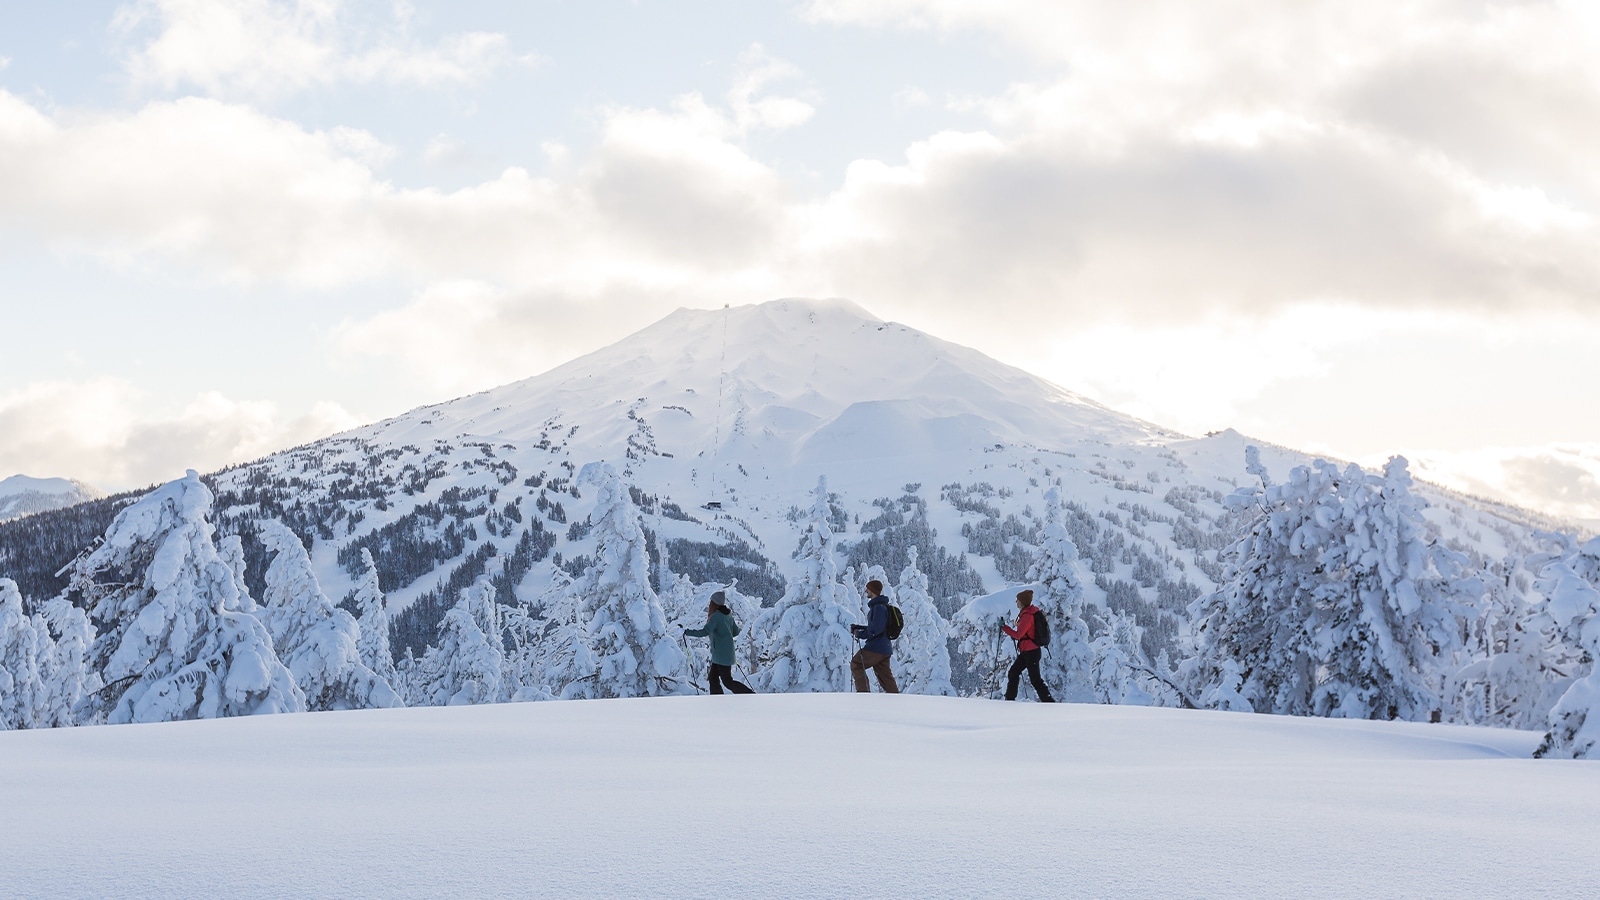 Three people snowshoe Tumalo Mountain near Bend, Oregon with a view of Mt. Bachelor behind them.